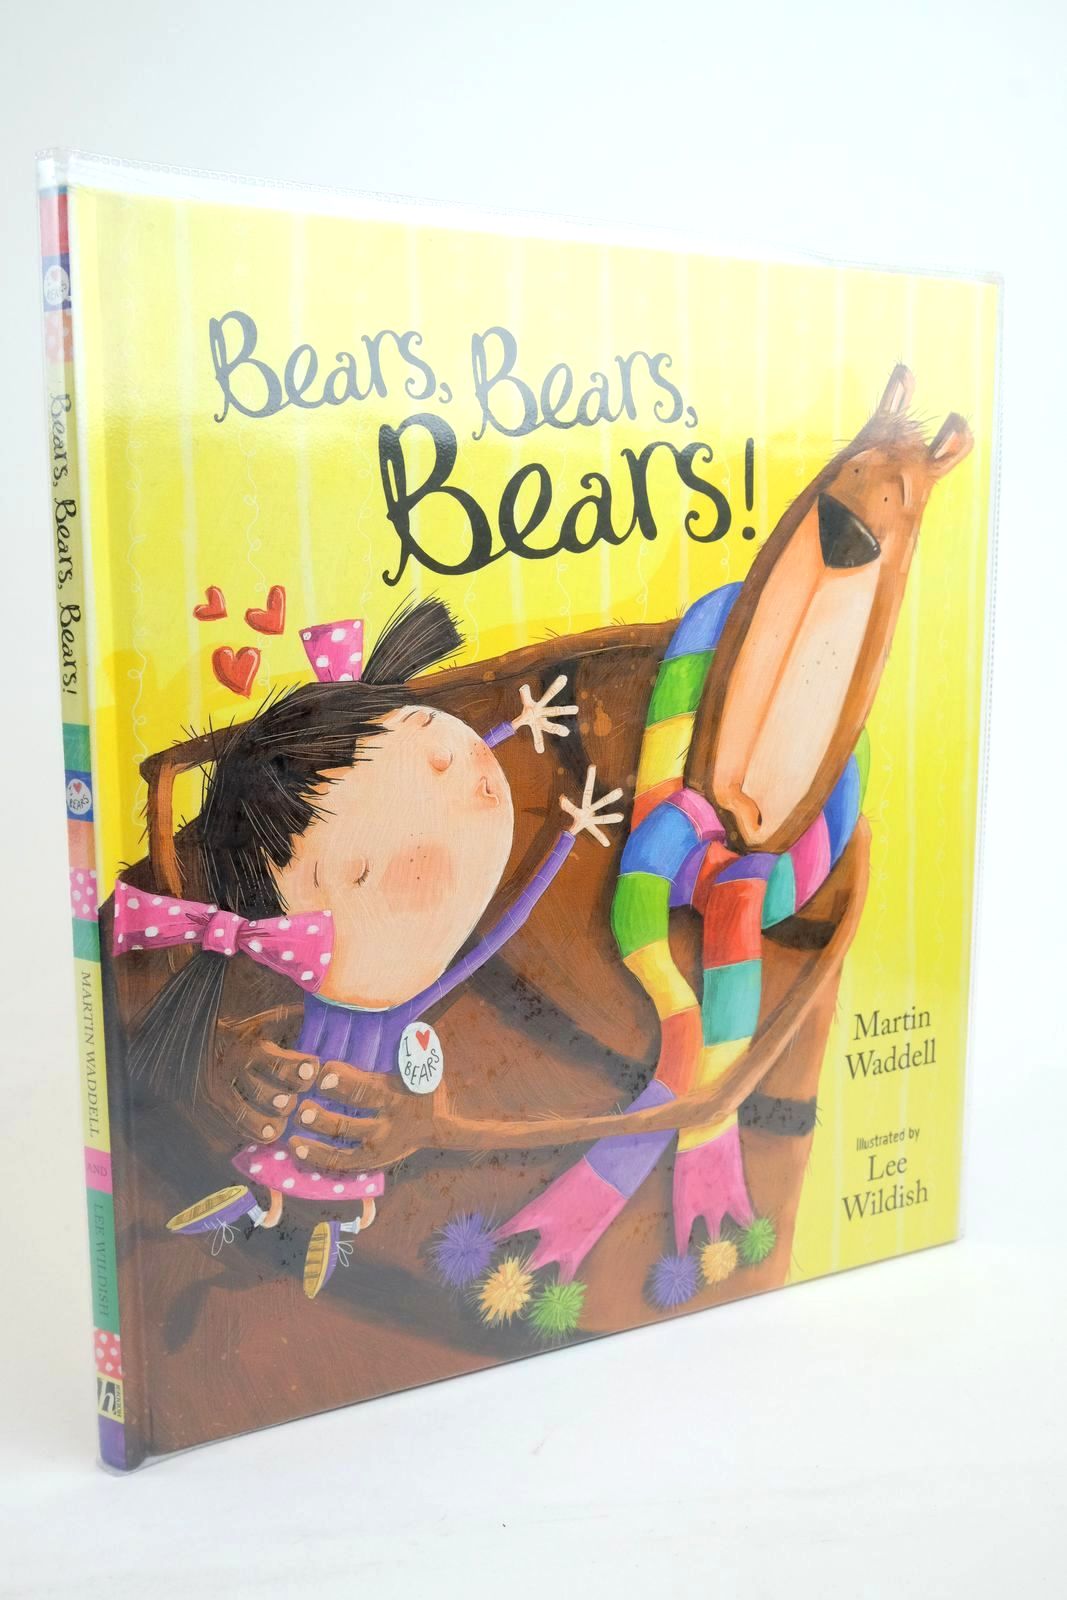 Photo of BEARS, BEARS, BEARS! written by Waddell, Martin illustrated by Wildish, Lee published by Hodder Children's Books (STOCK CODE: 1322368)  for sale by Stella & Rose's Books